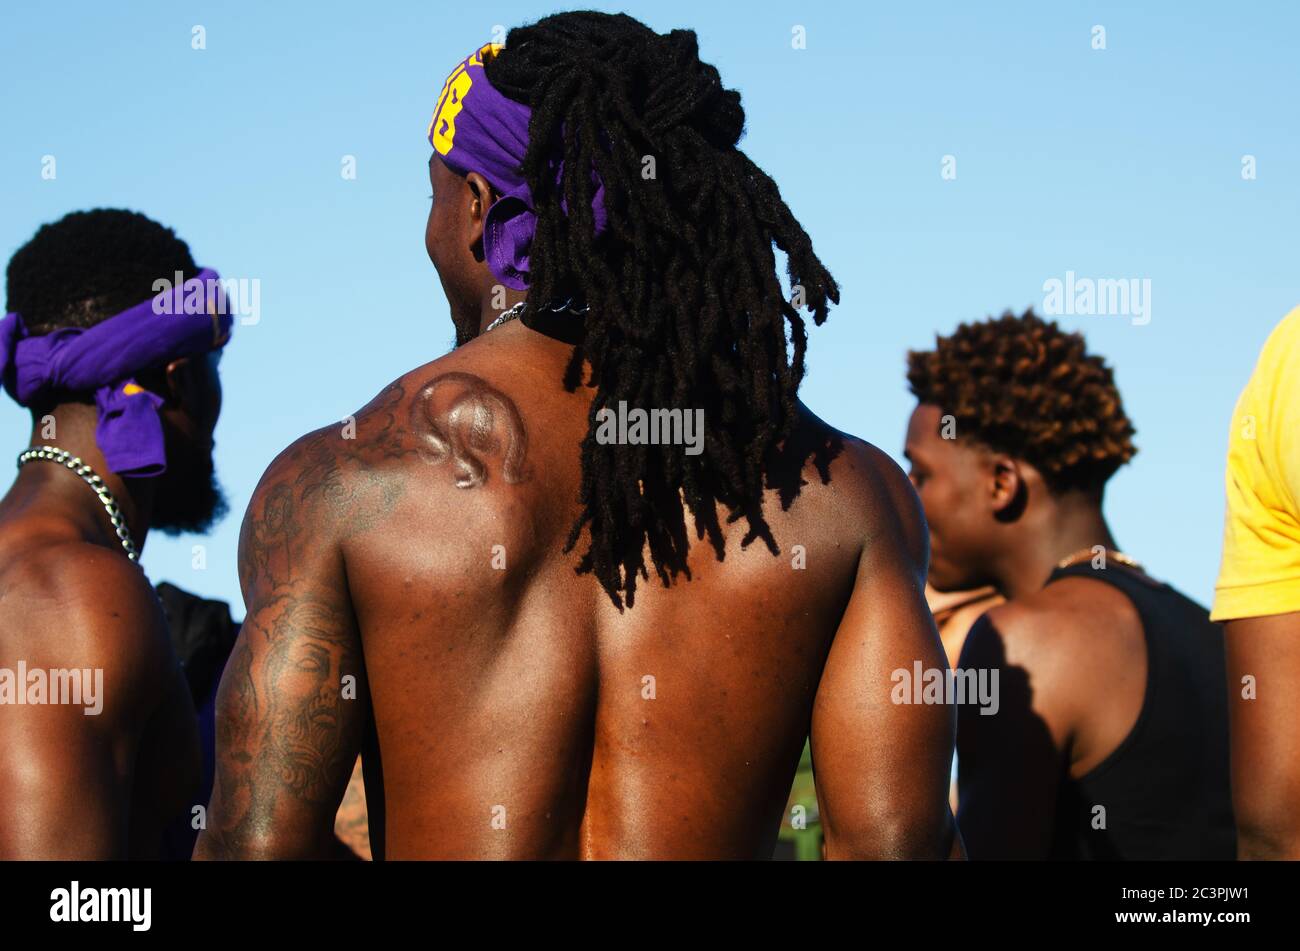 MIAMI - MARCH 23, 2019: Young men from the Omega Psi Phi fraternity stand in the crowd at a Spring Break party on South Beach. Stock Photo